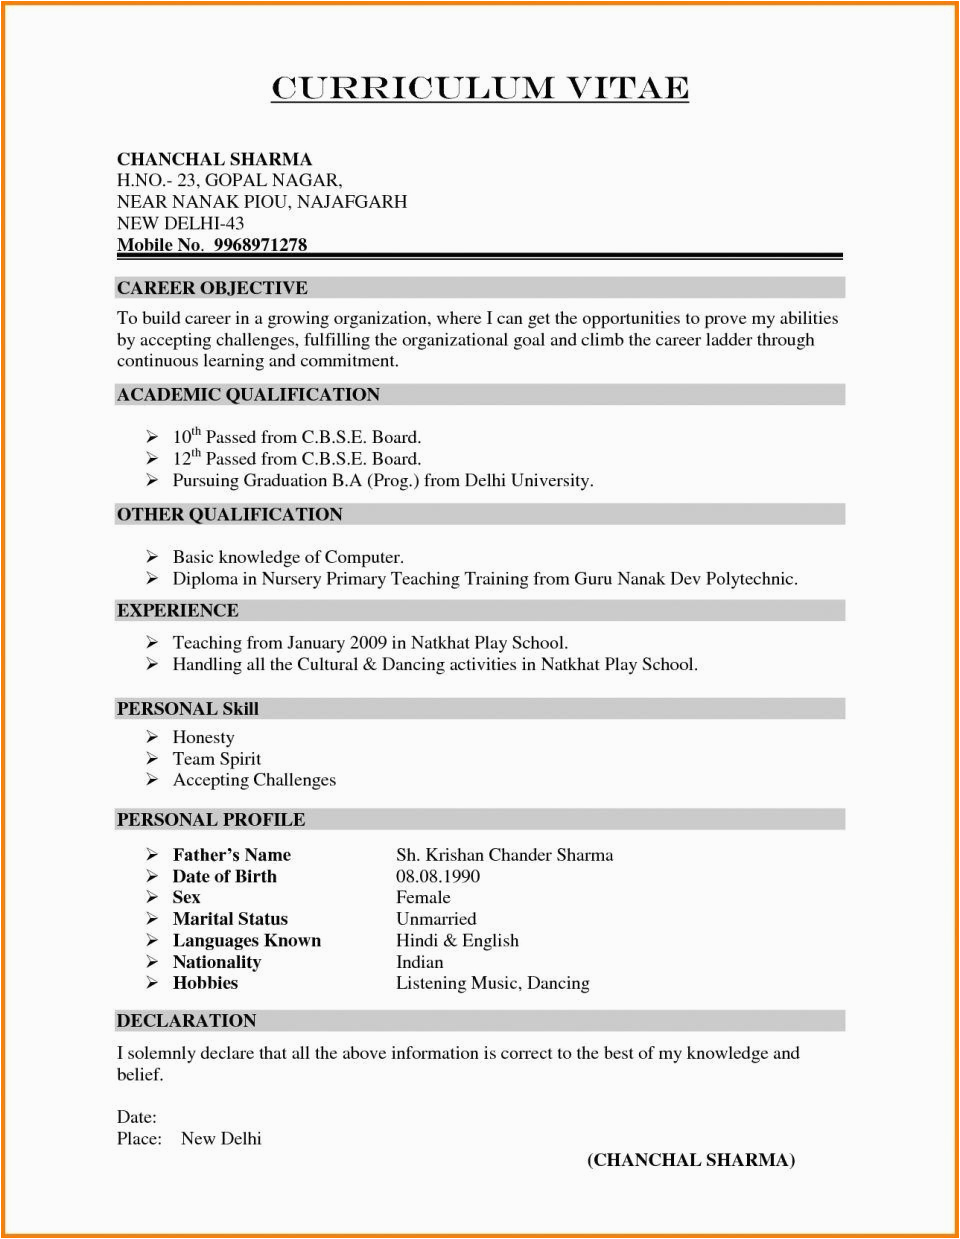 Resume Template for Teachers In India Indian School Teacher Resume format Indian School